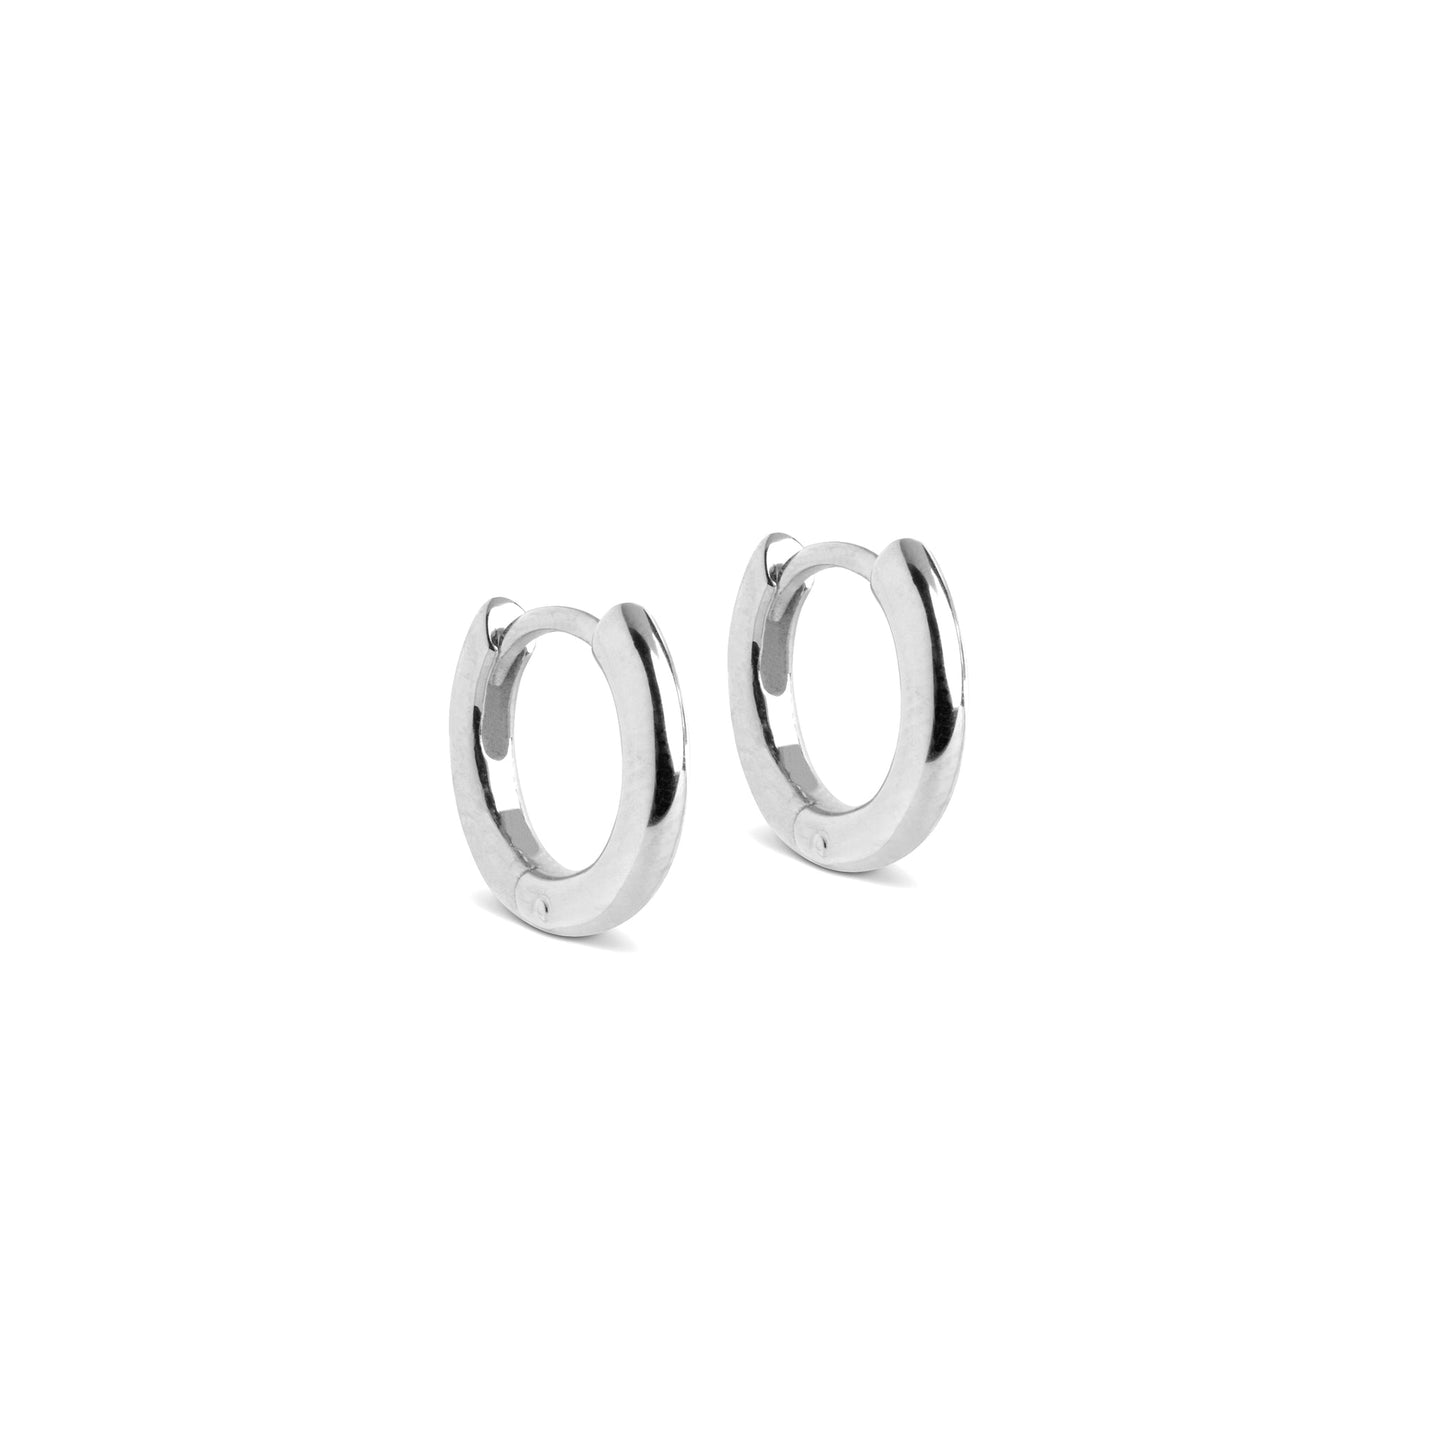 Chunky classic hoops silver